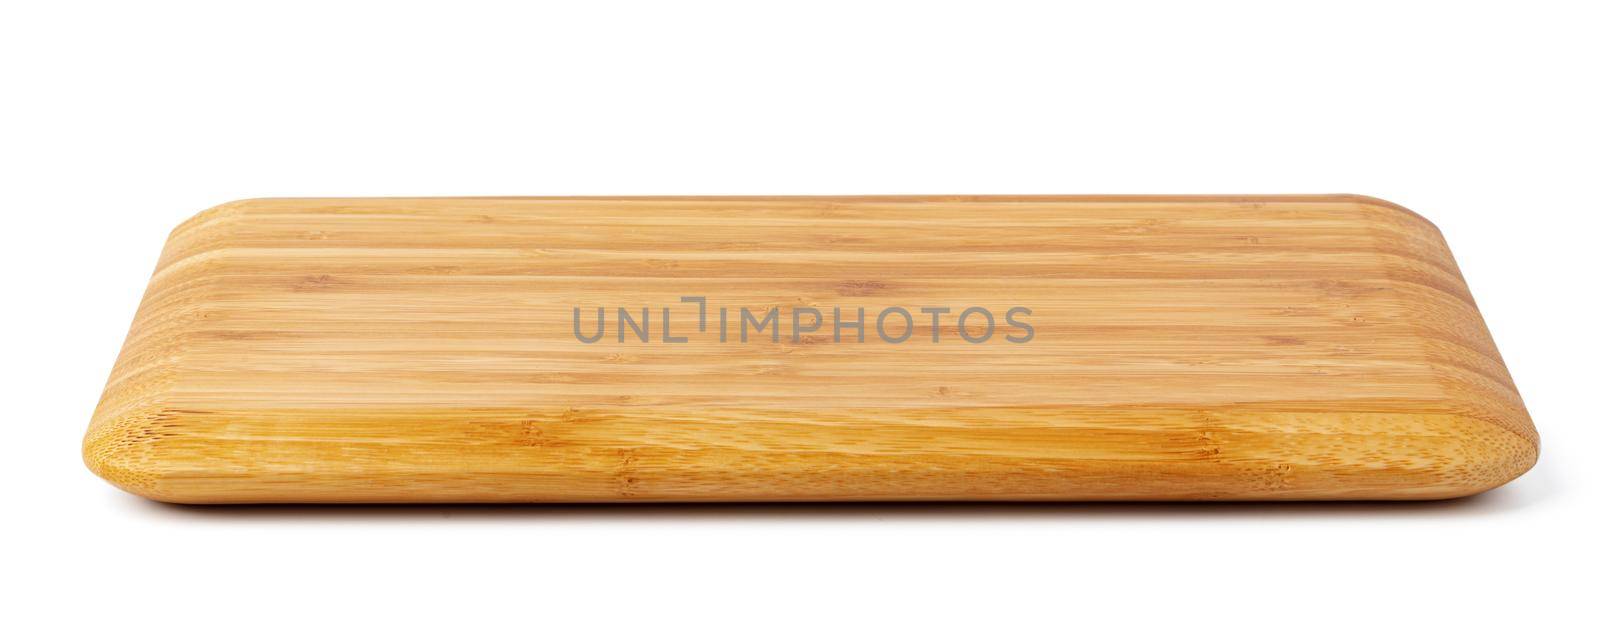 Wooden board isolated on white background, close up photo